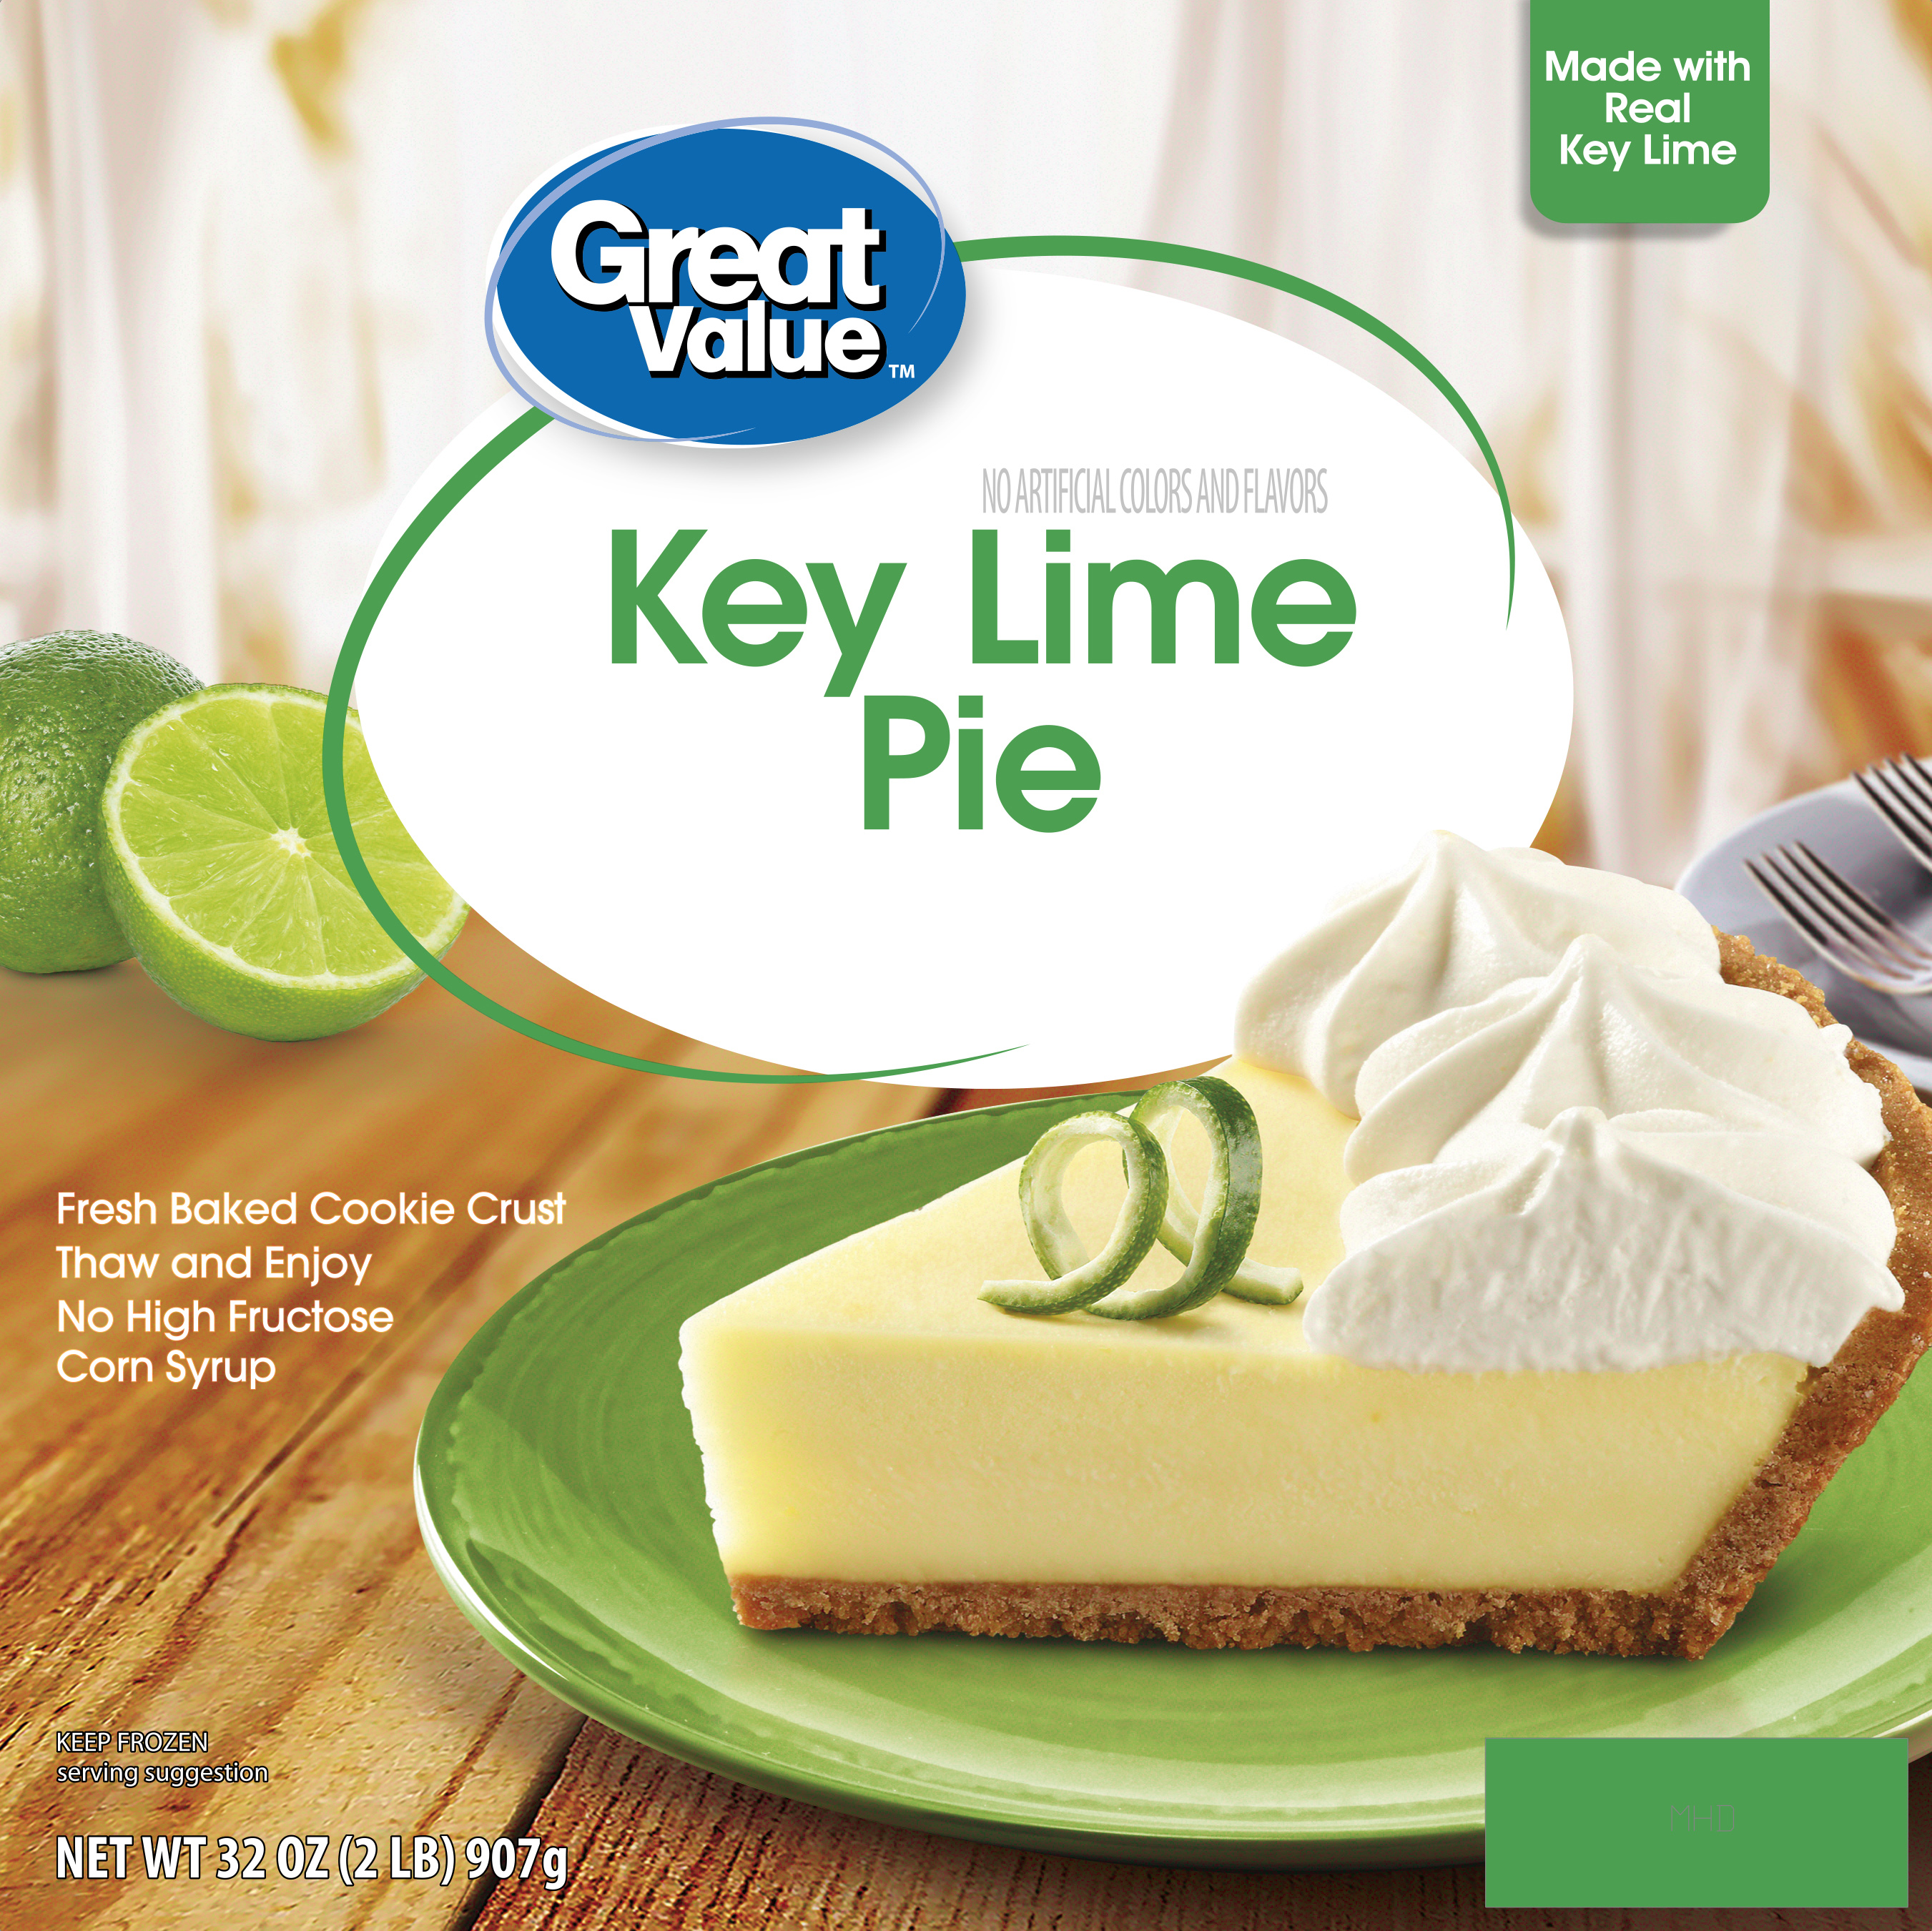 Great Value Key Lime Pie, Frozen Dessert, 32 oz, Made with Real Key Lime, No HFCS, Box (Frozen) - image 1 of 5